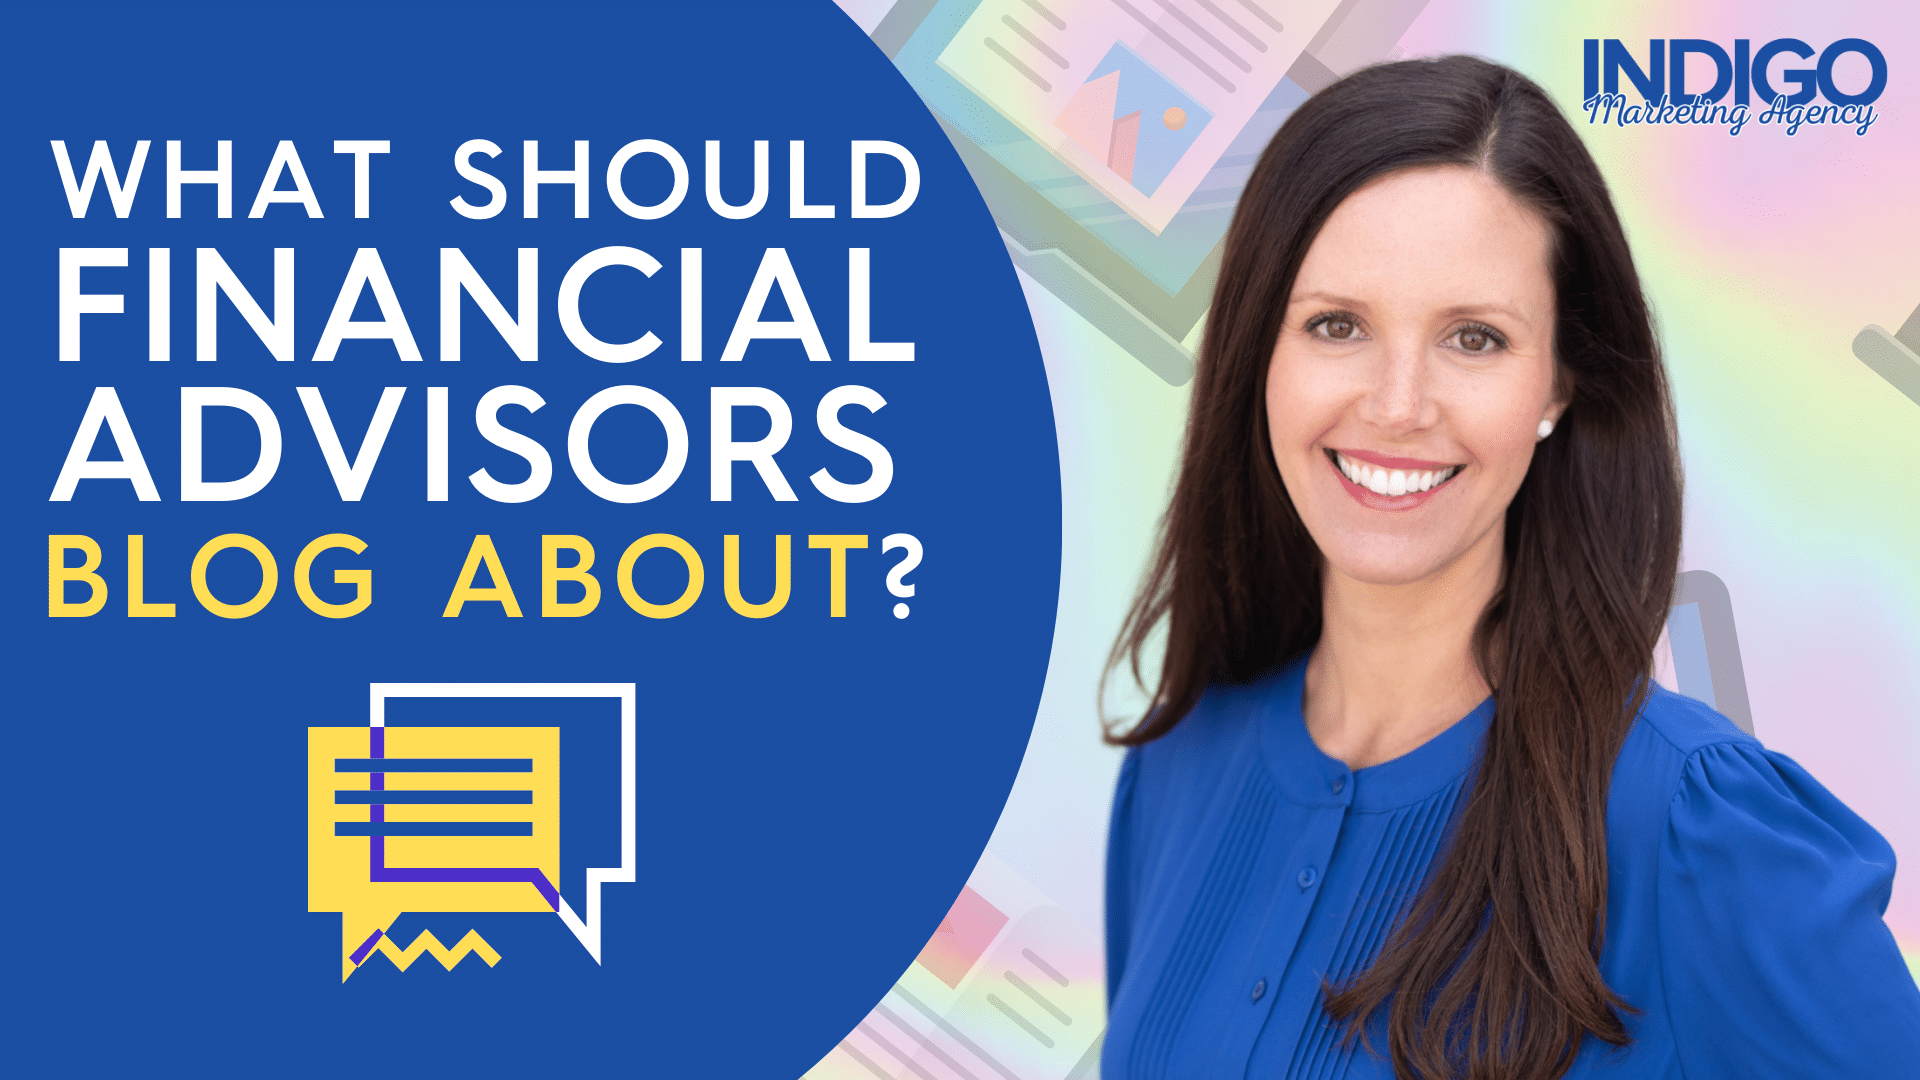 What should financial advisors blog about